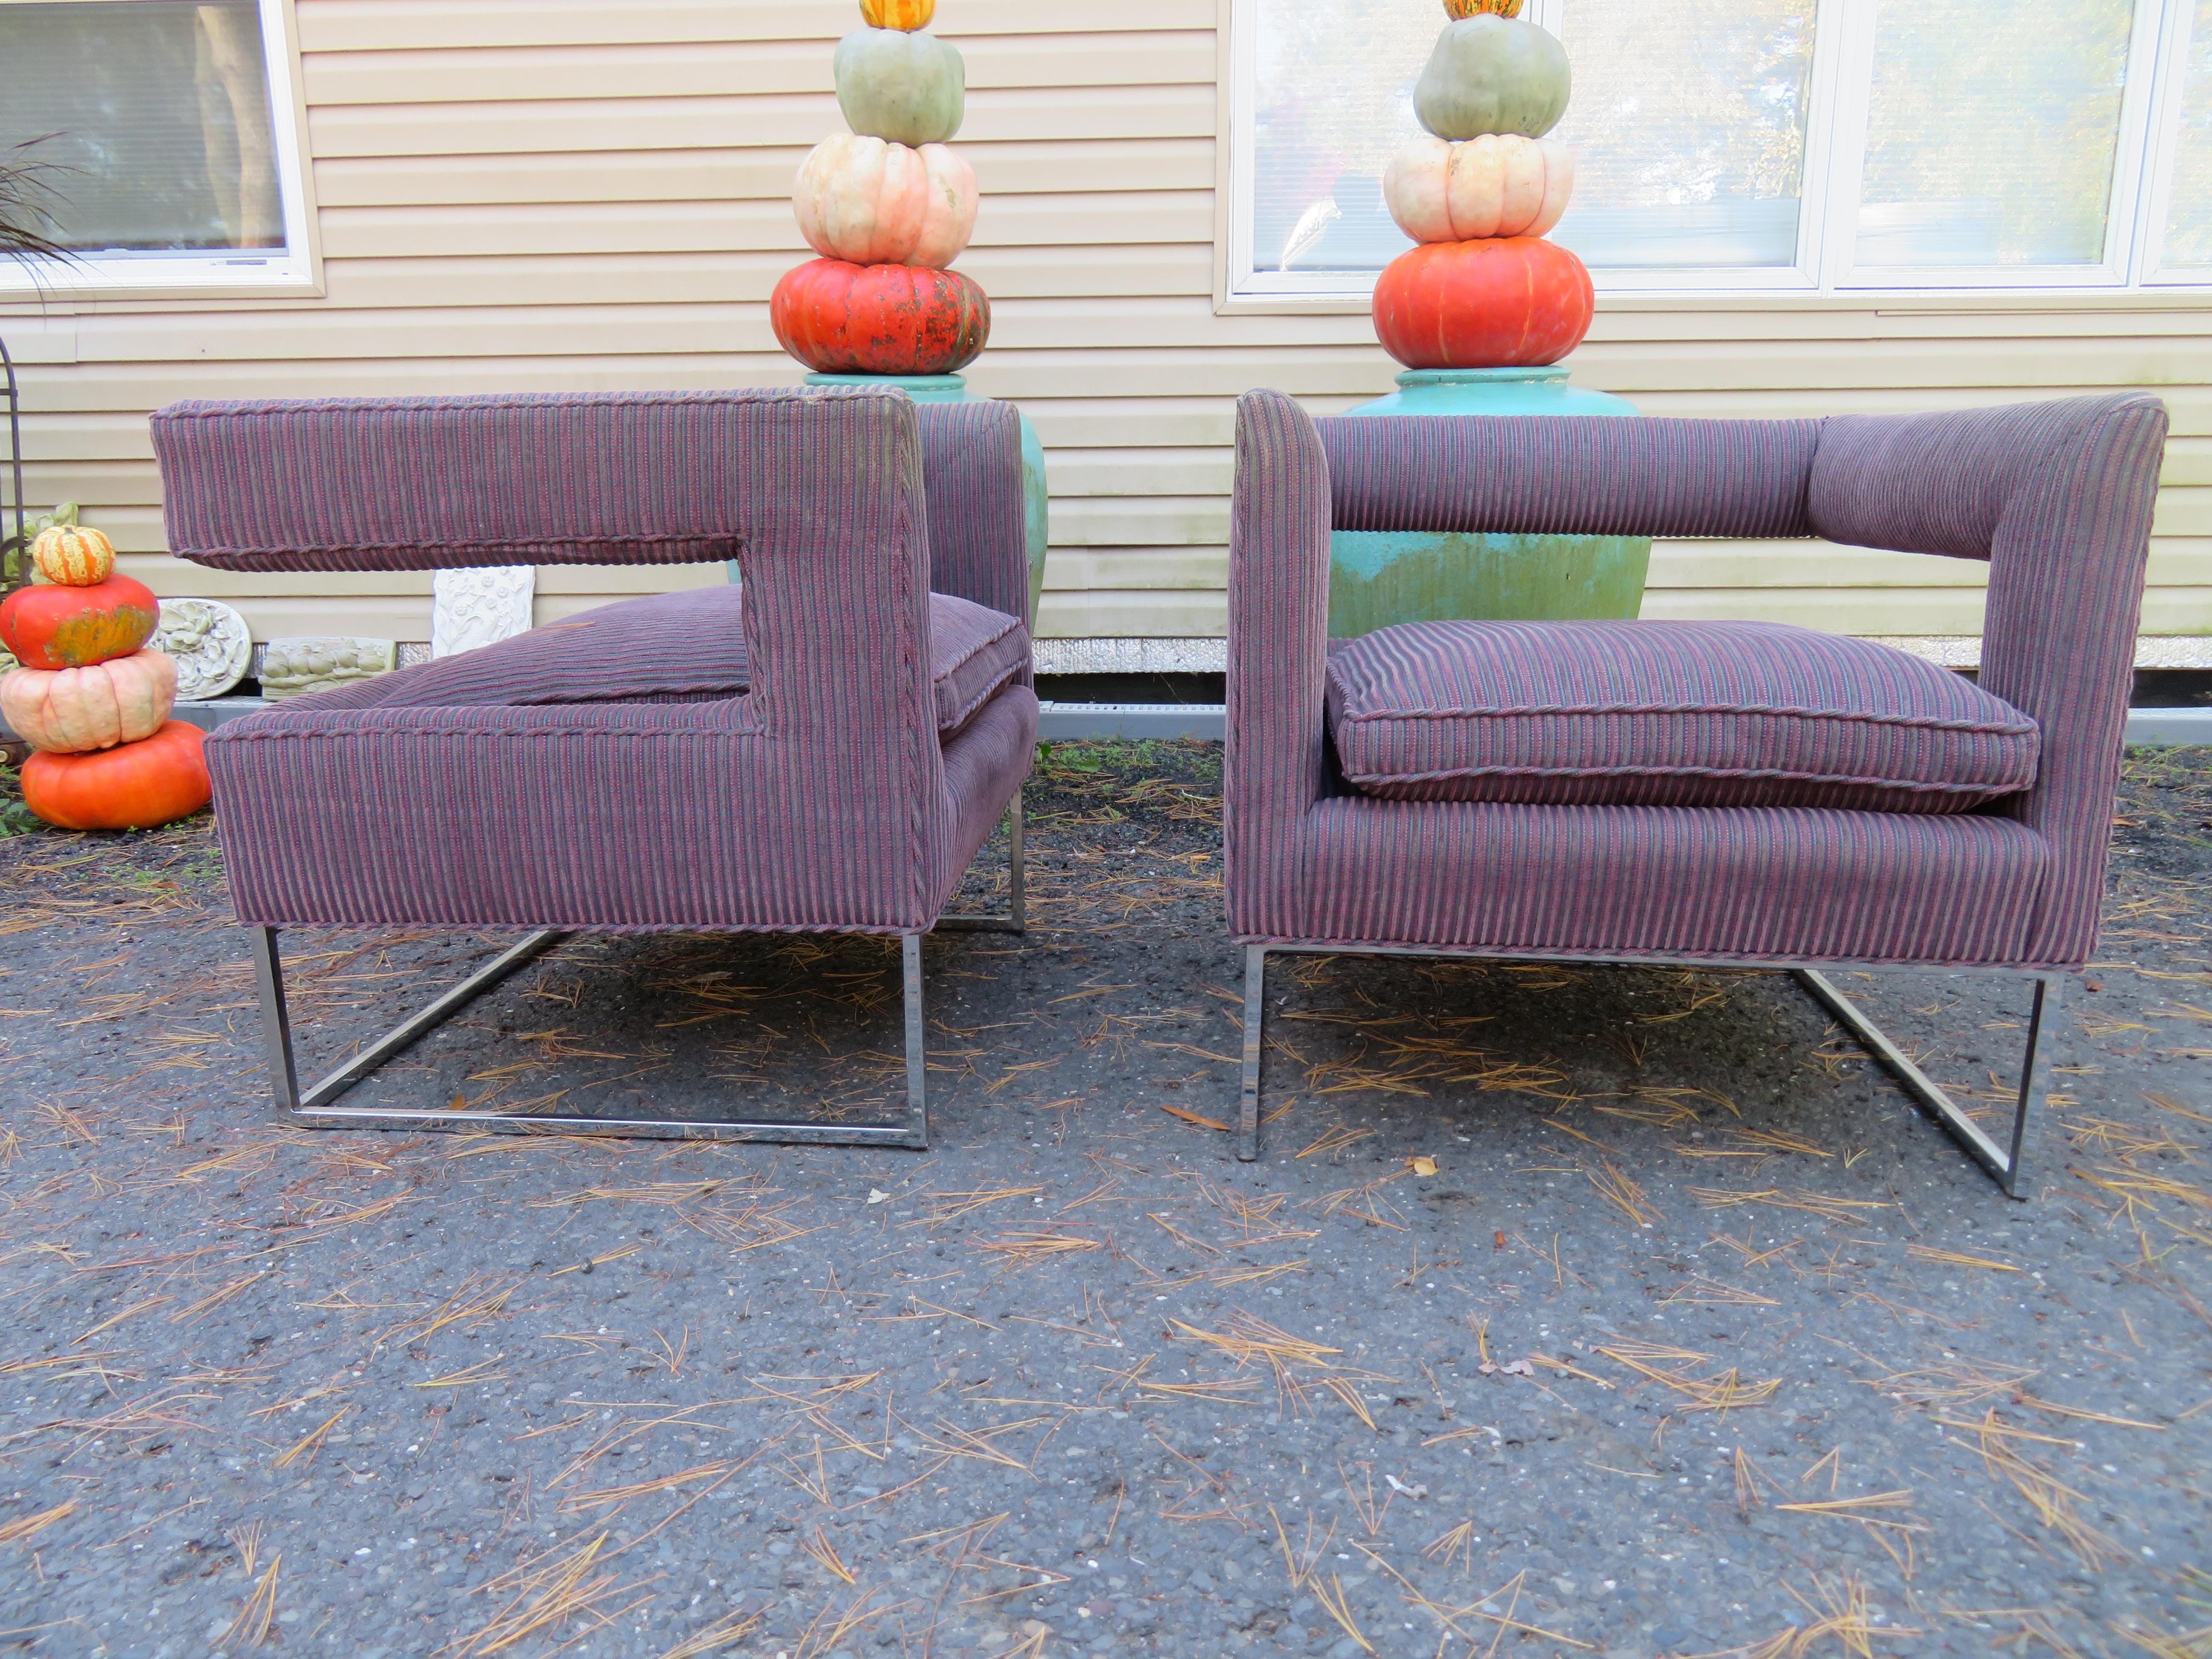 Sensational pair of Milo Baughman style open back chrome cube chairs. They are from Bernhardt’s Flair collection. The open backs appear to float sitting on square tubular chrome cube bases. The Upholstery looks newer and is a woven blue and purple